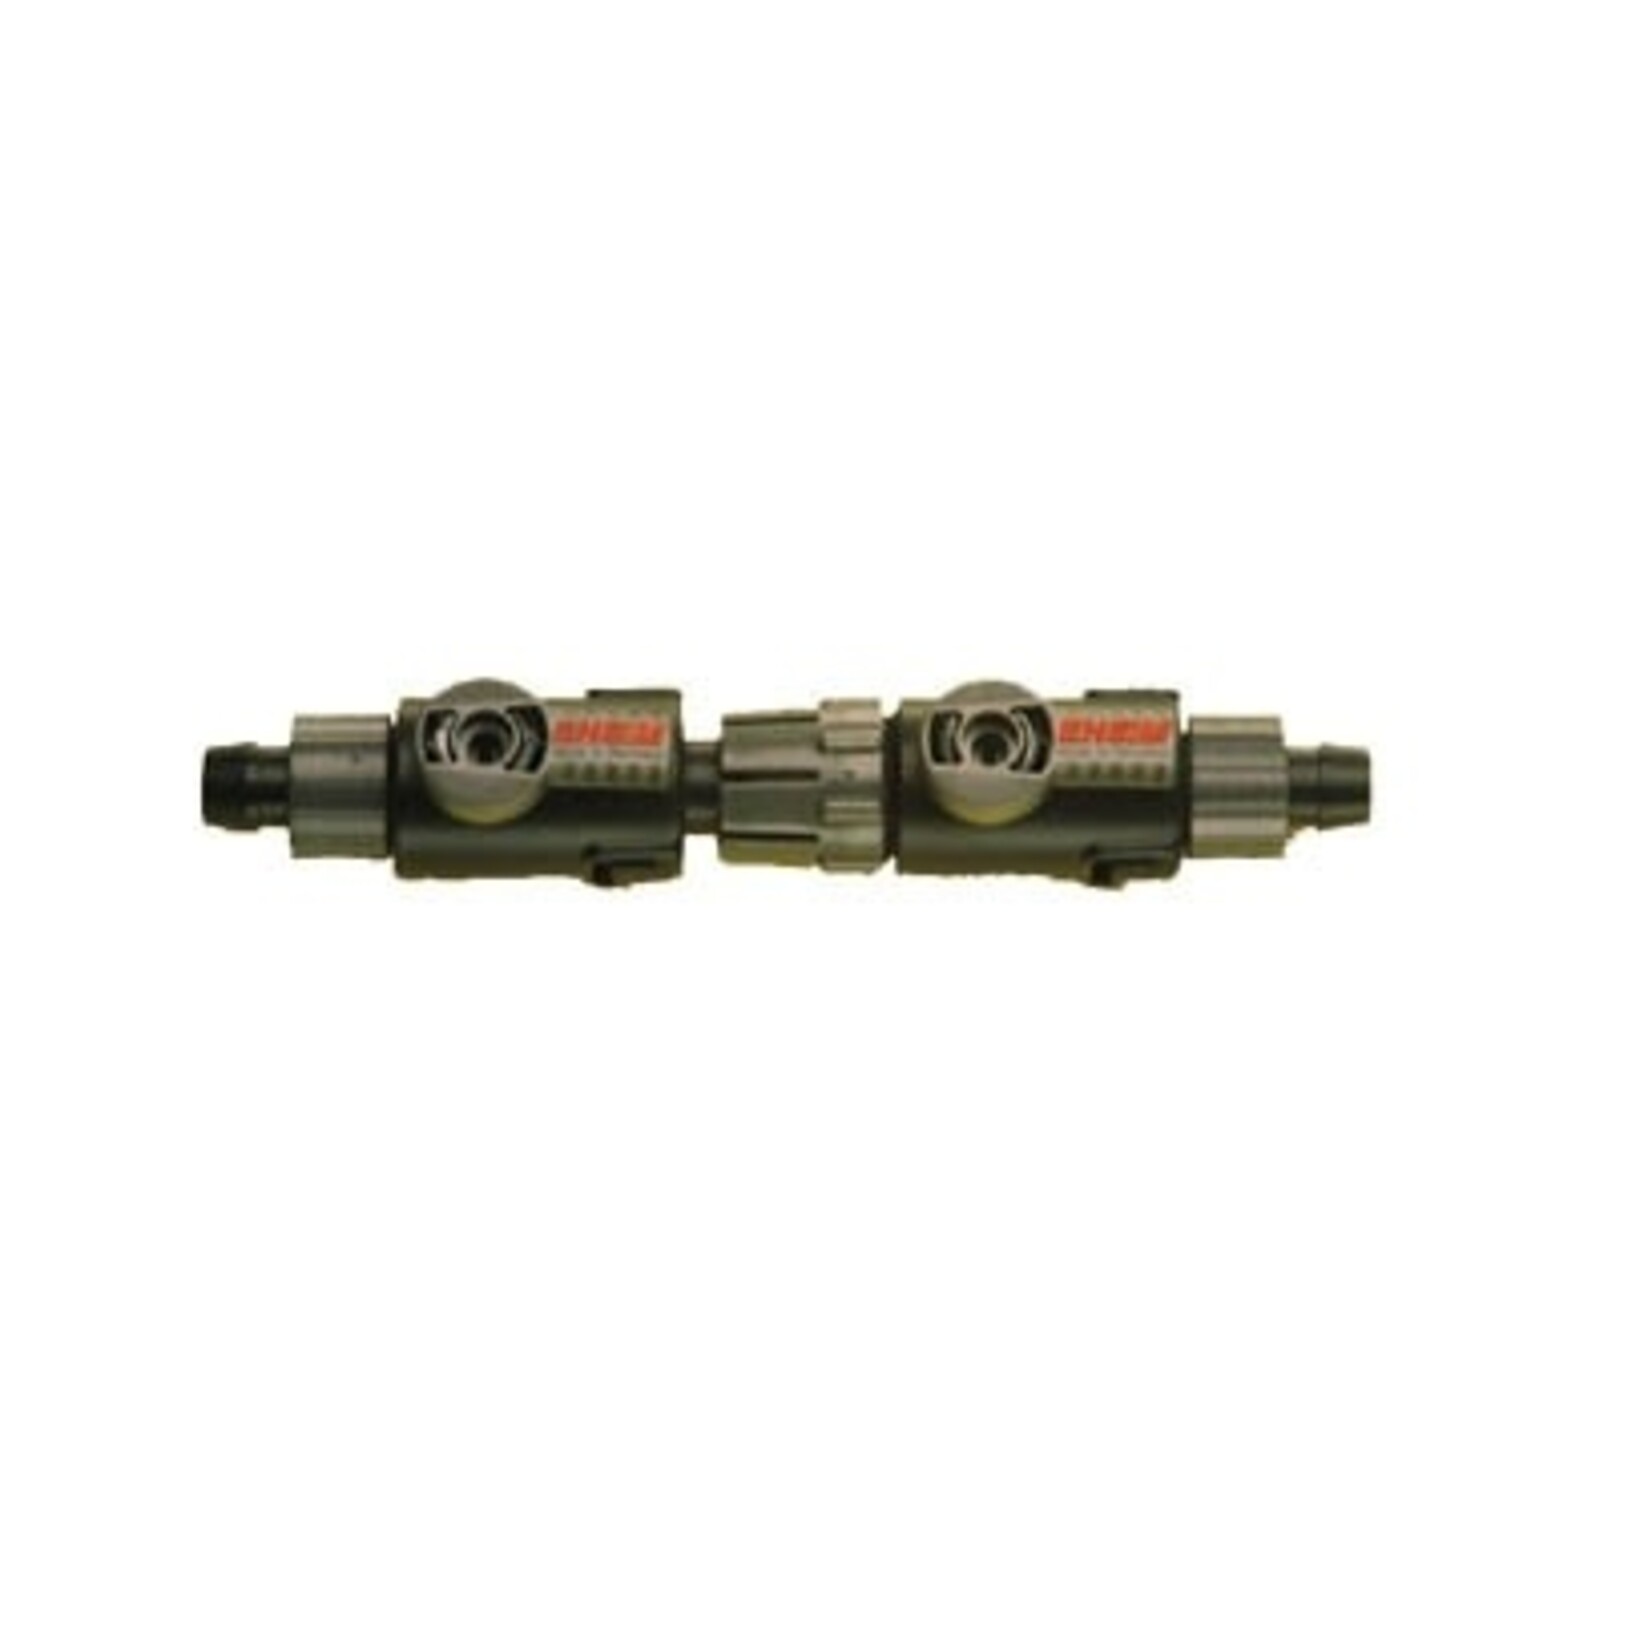 Eheim 2 taps with quick coupling for hose 16-22